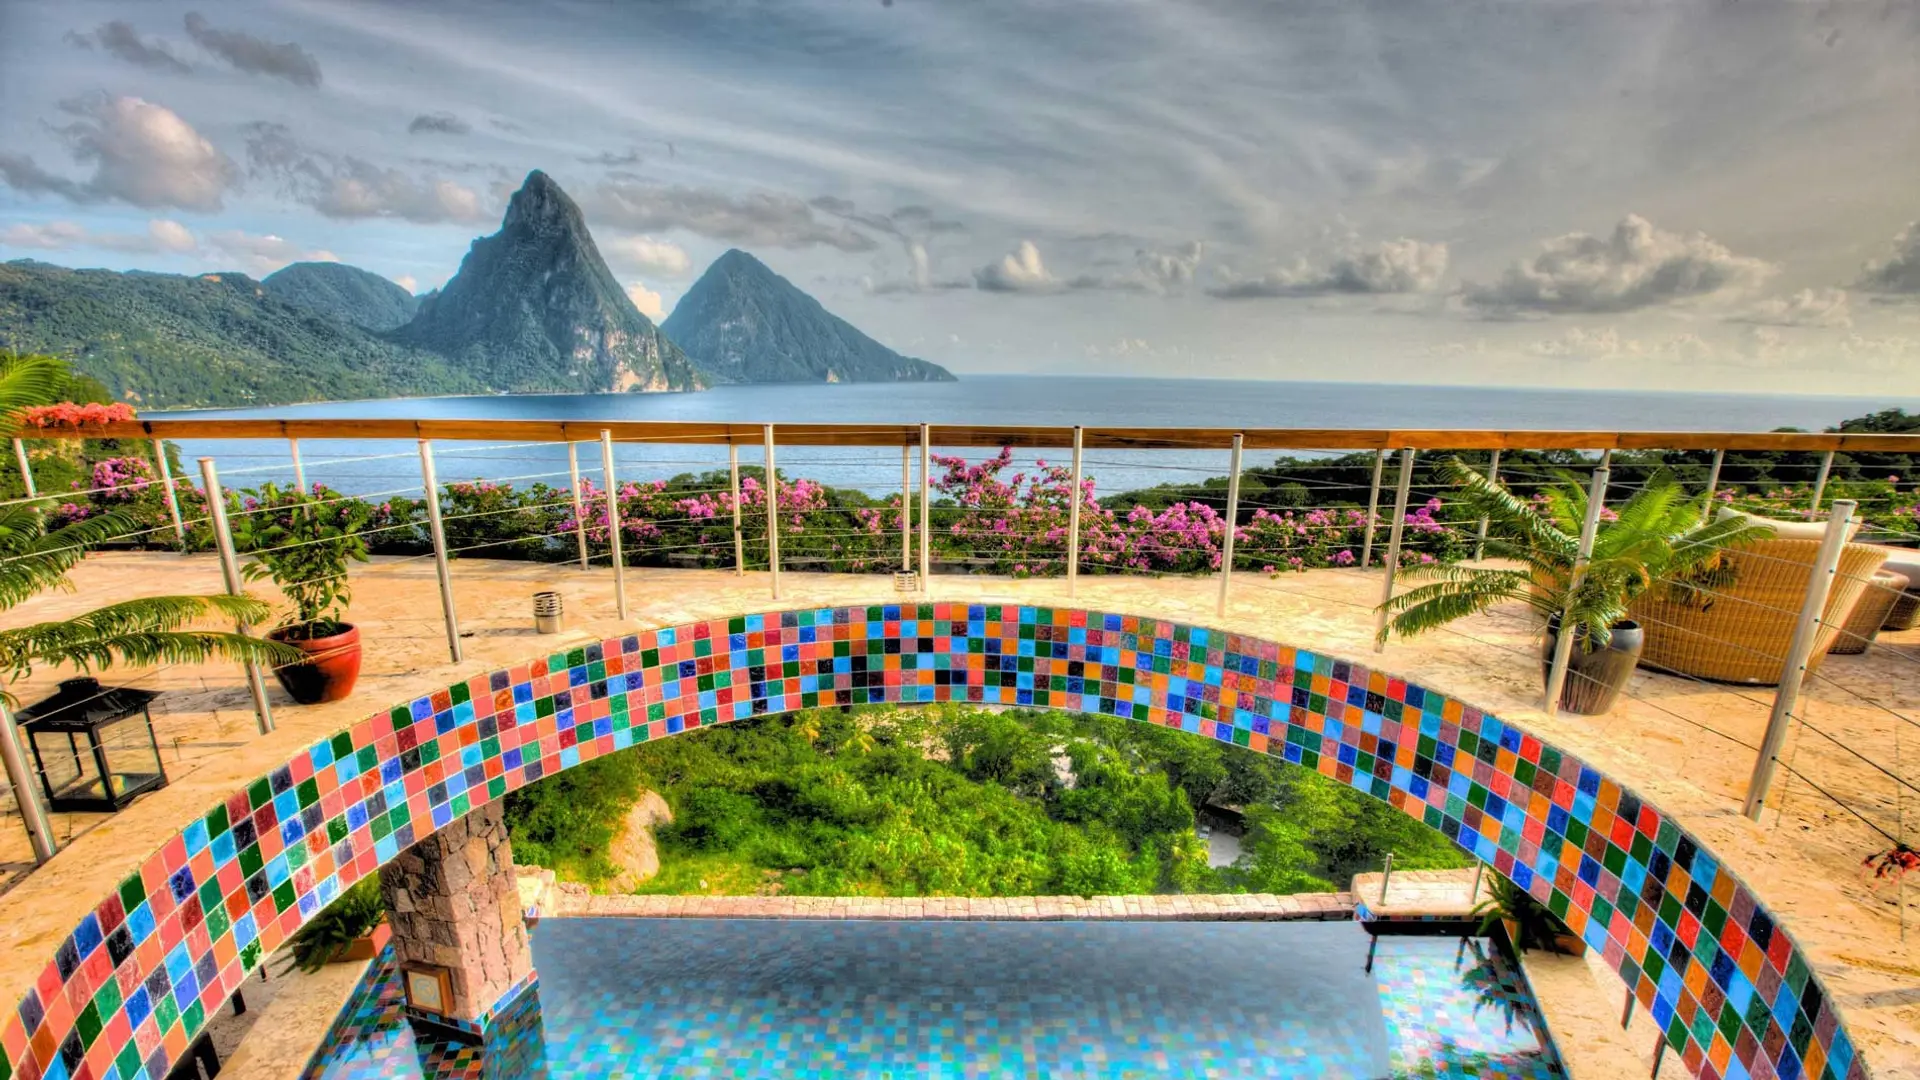 Hotel review Service & Facilities' - Jade Mountain - 2